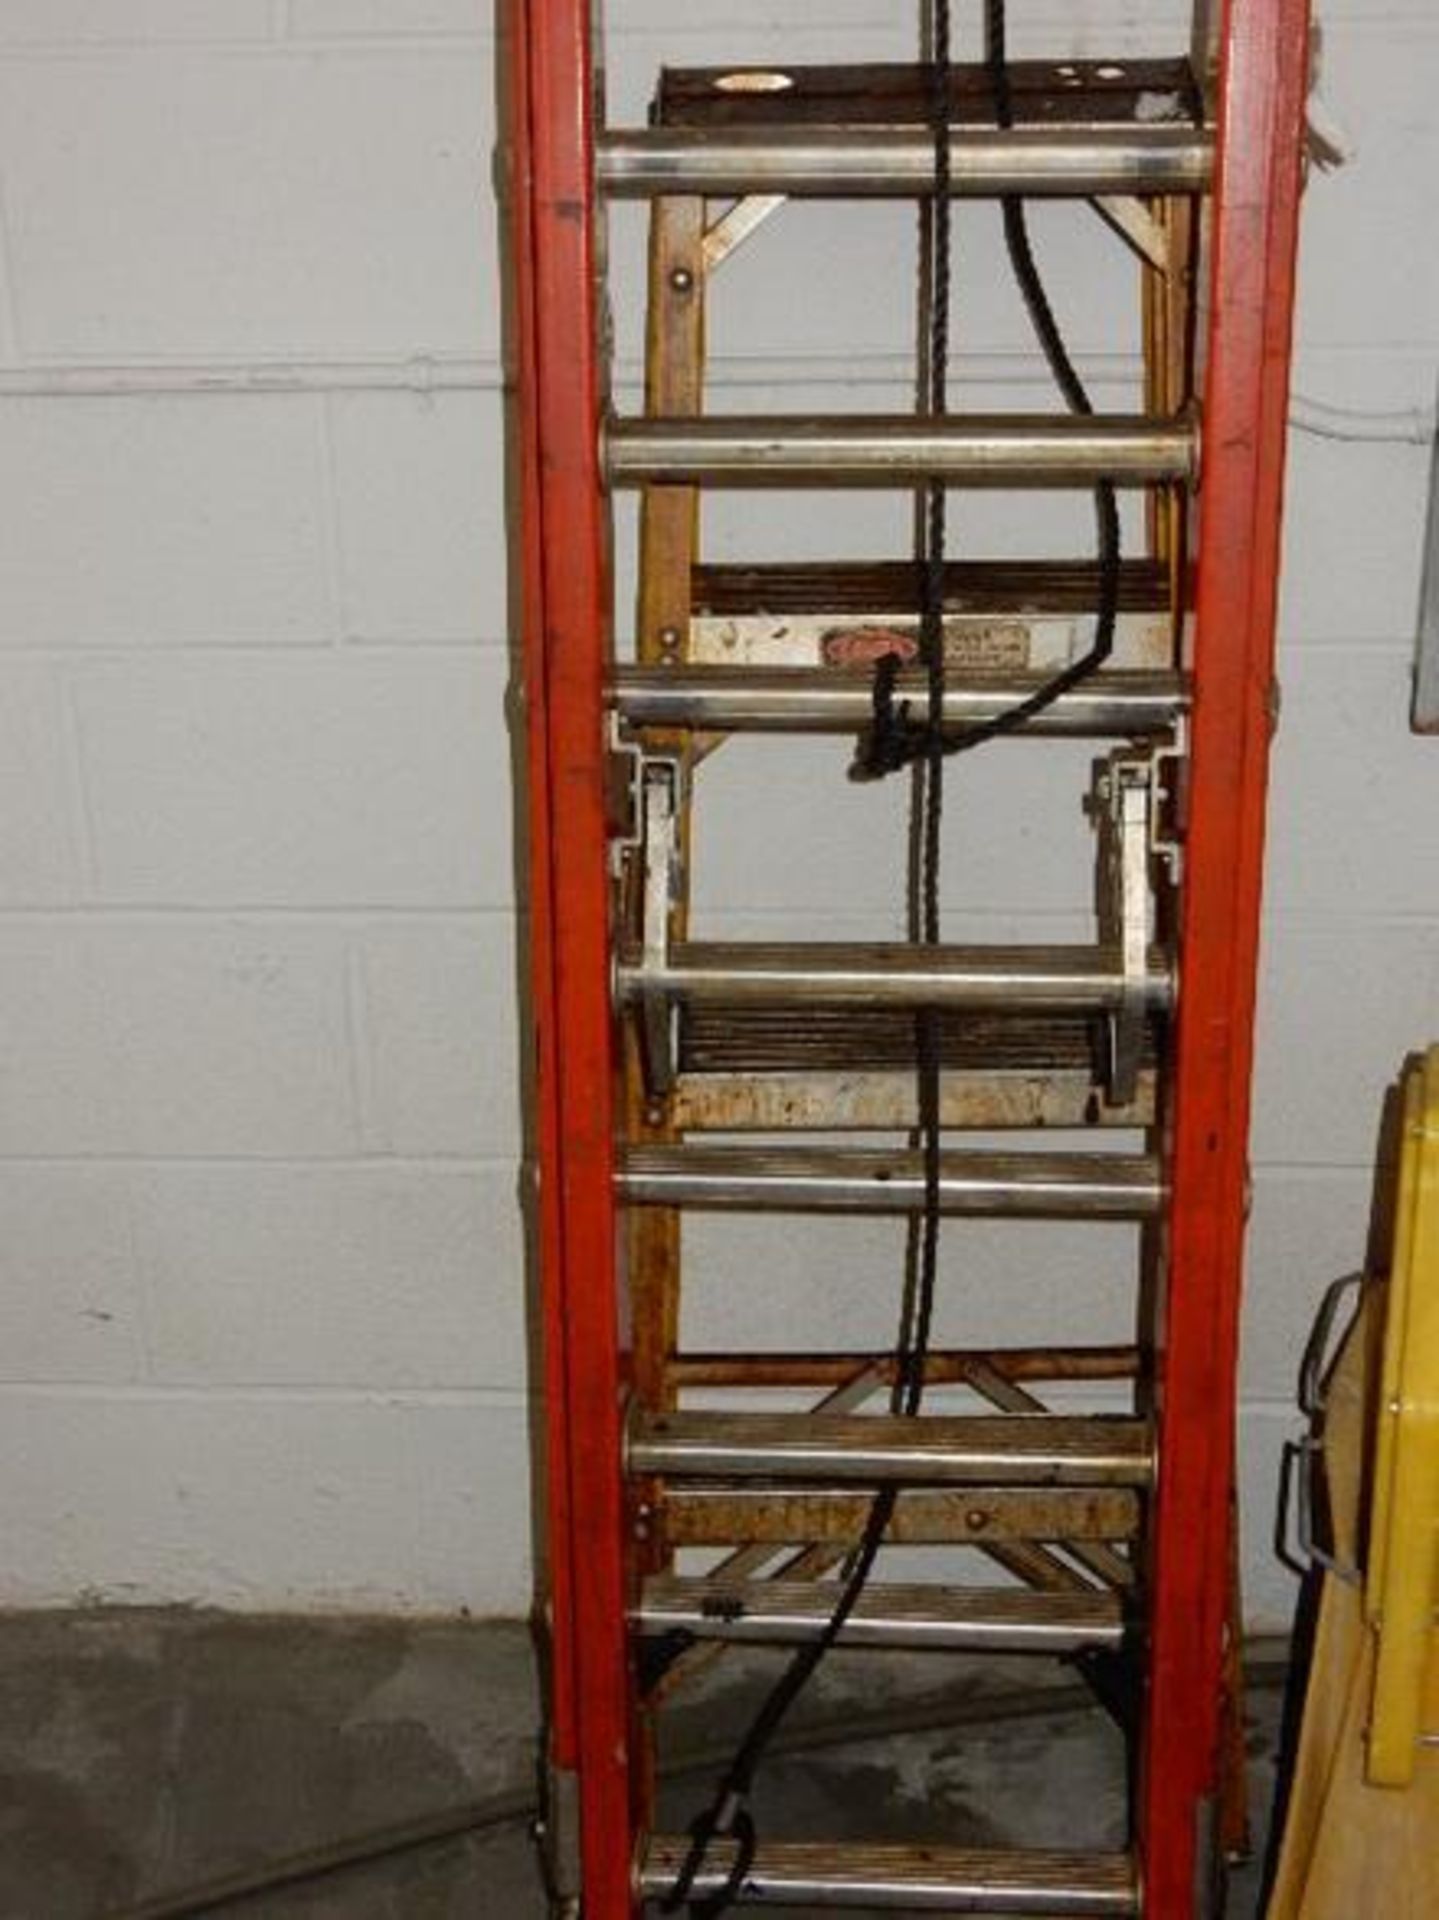 Fiberglass 16 ft. Type I Extension Ladder with additional 4 ft. Step Ladder type I - Image 2 of 4